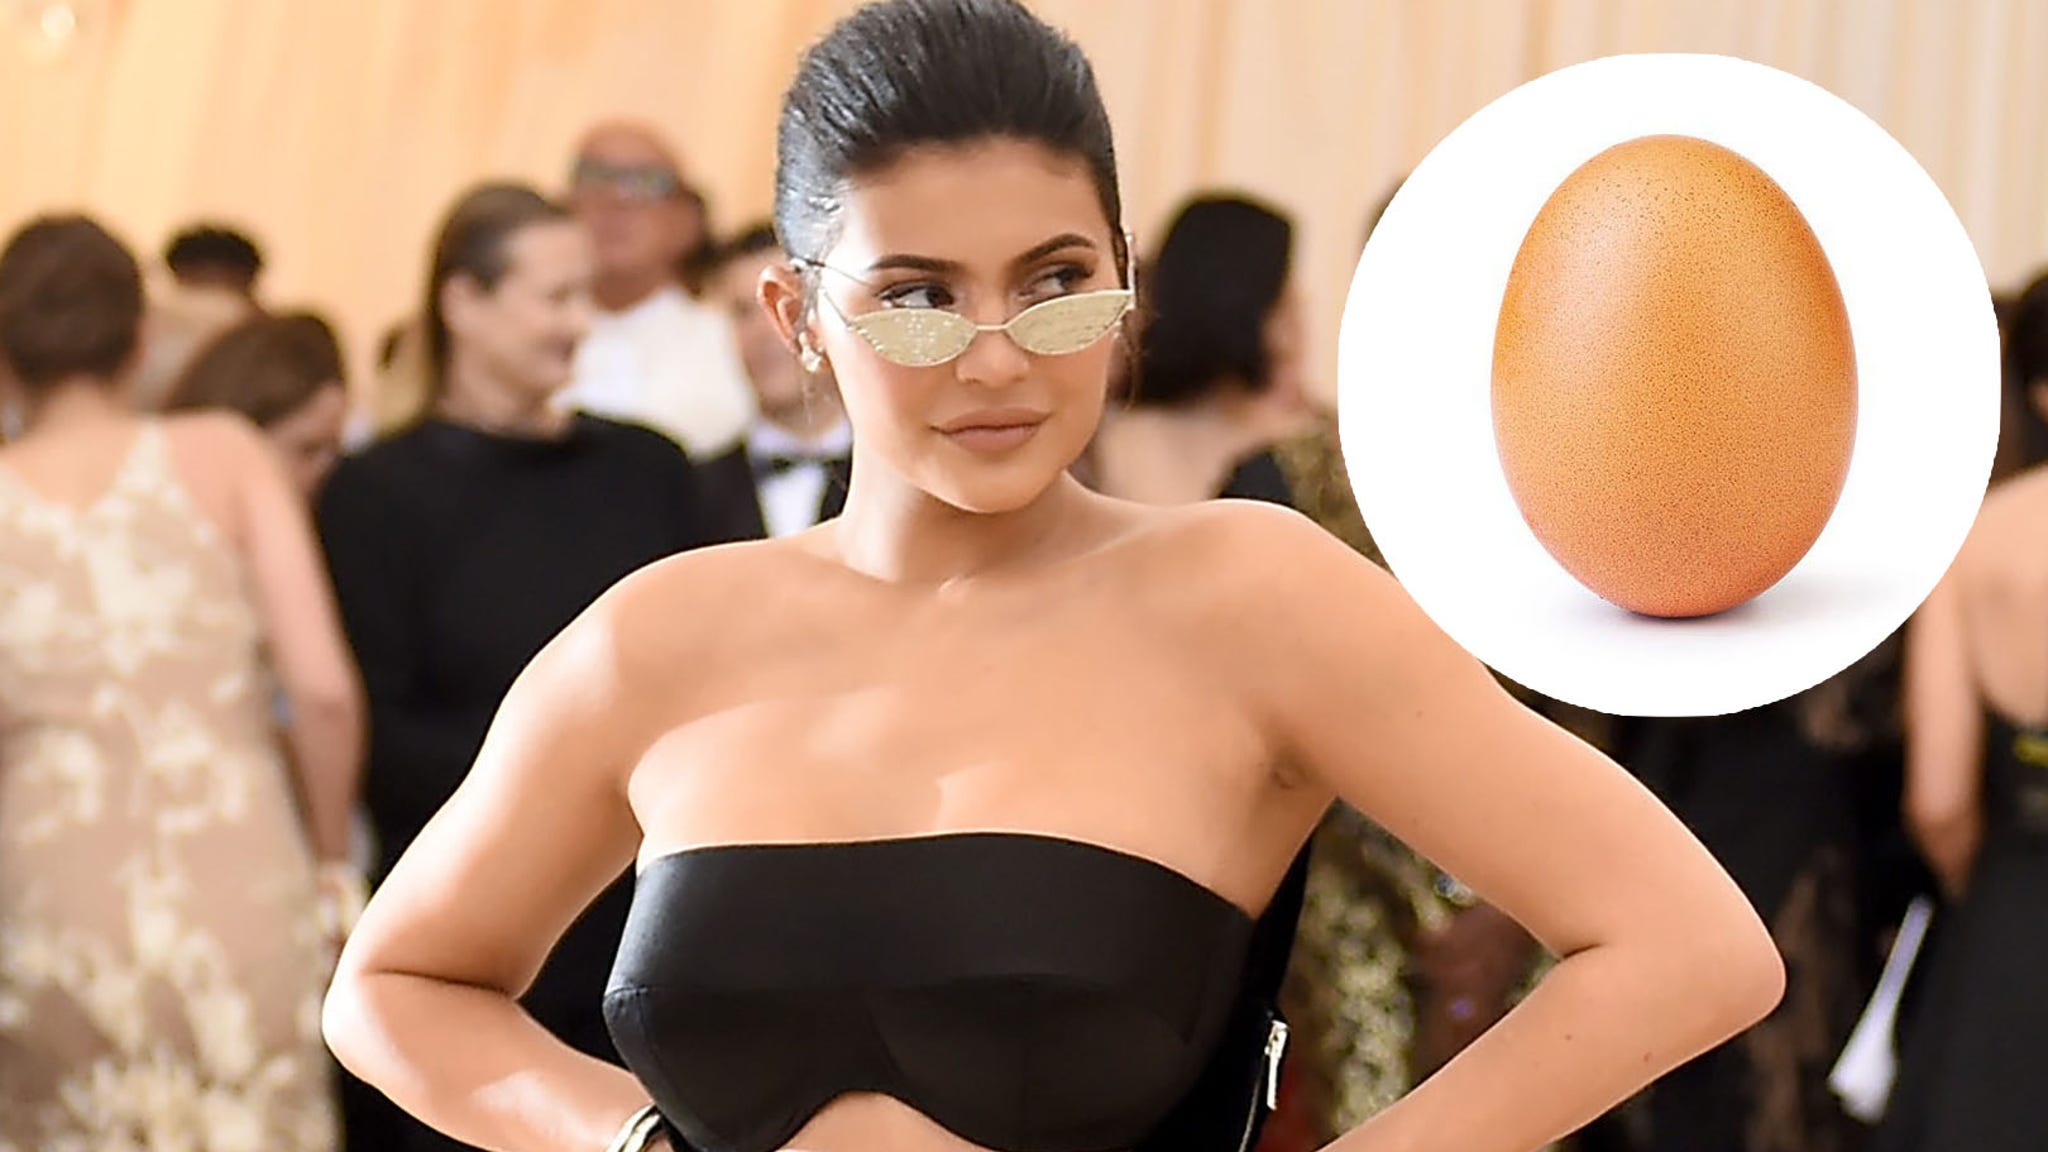 How an egg beat Kylie Jenner at her own Instagram game